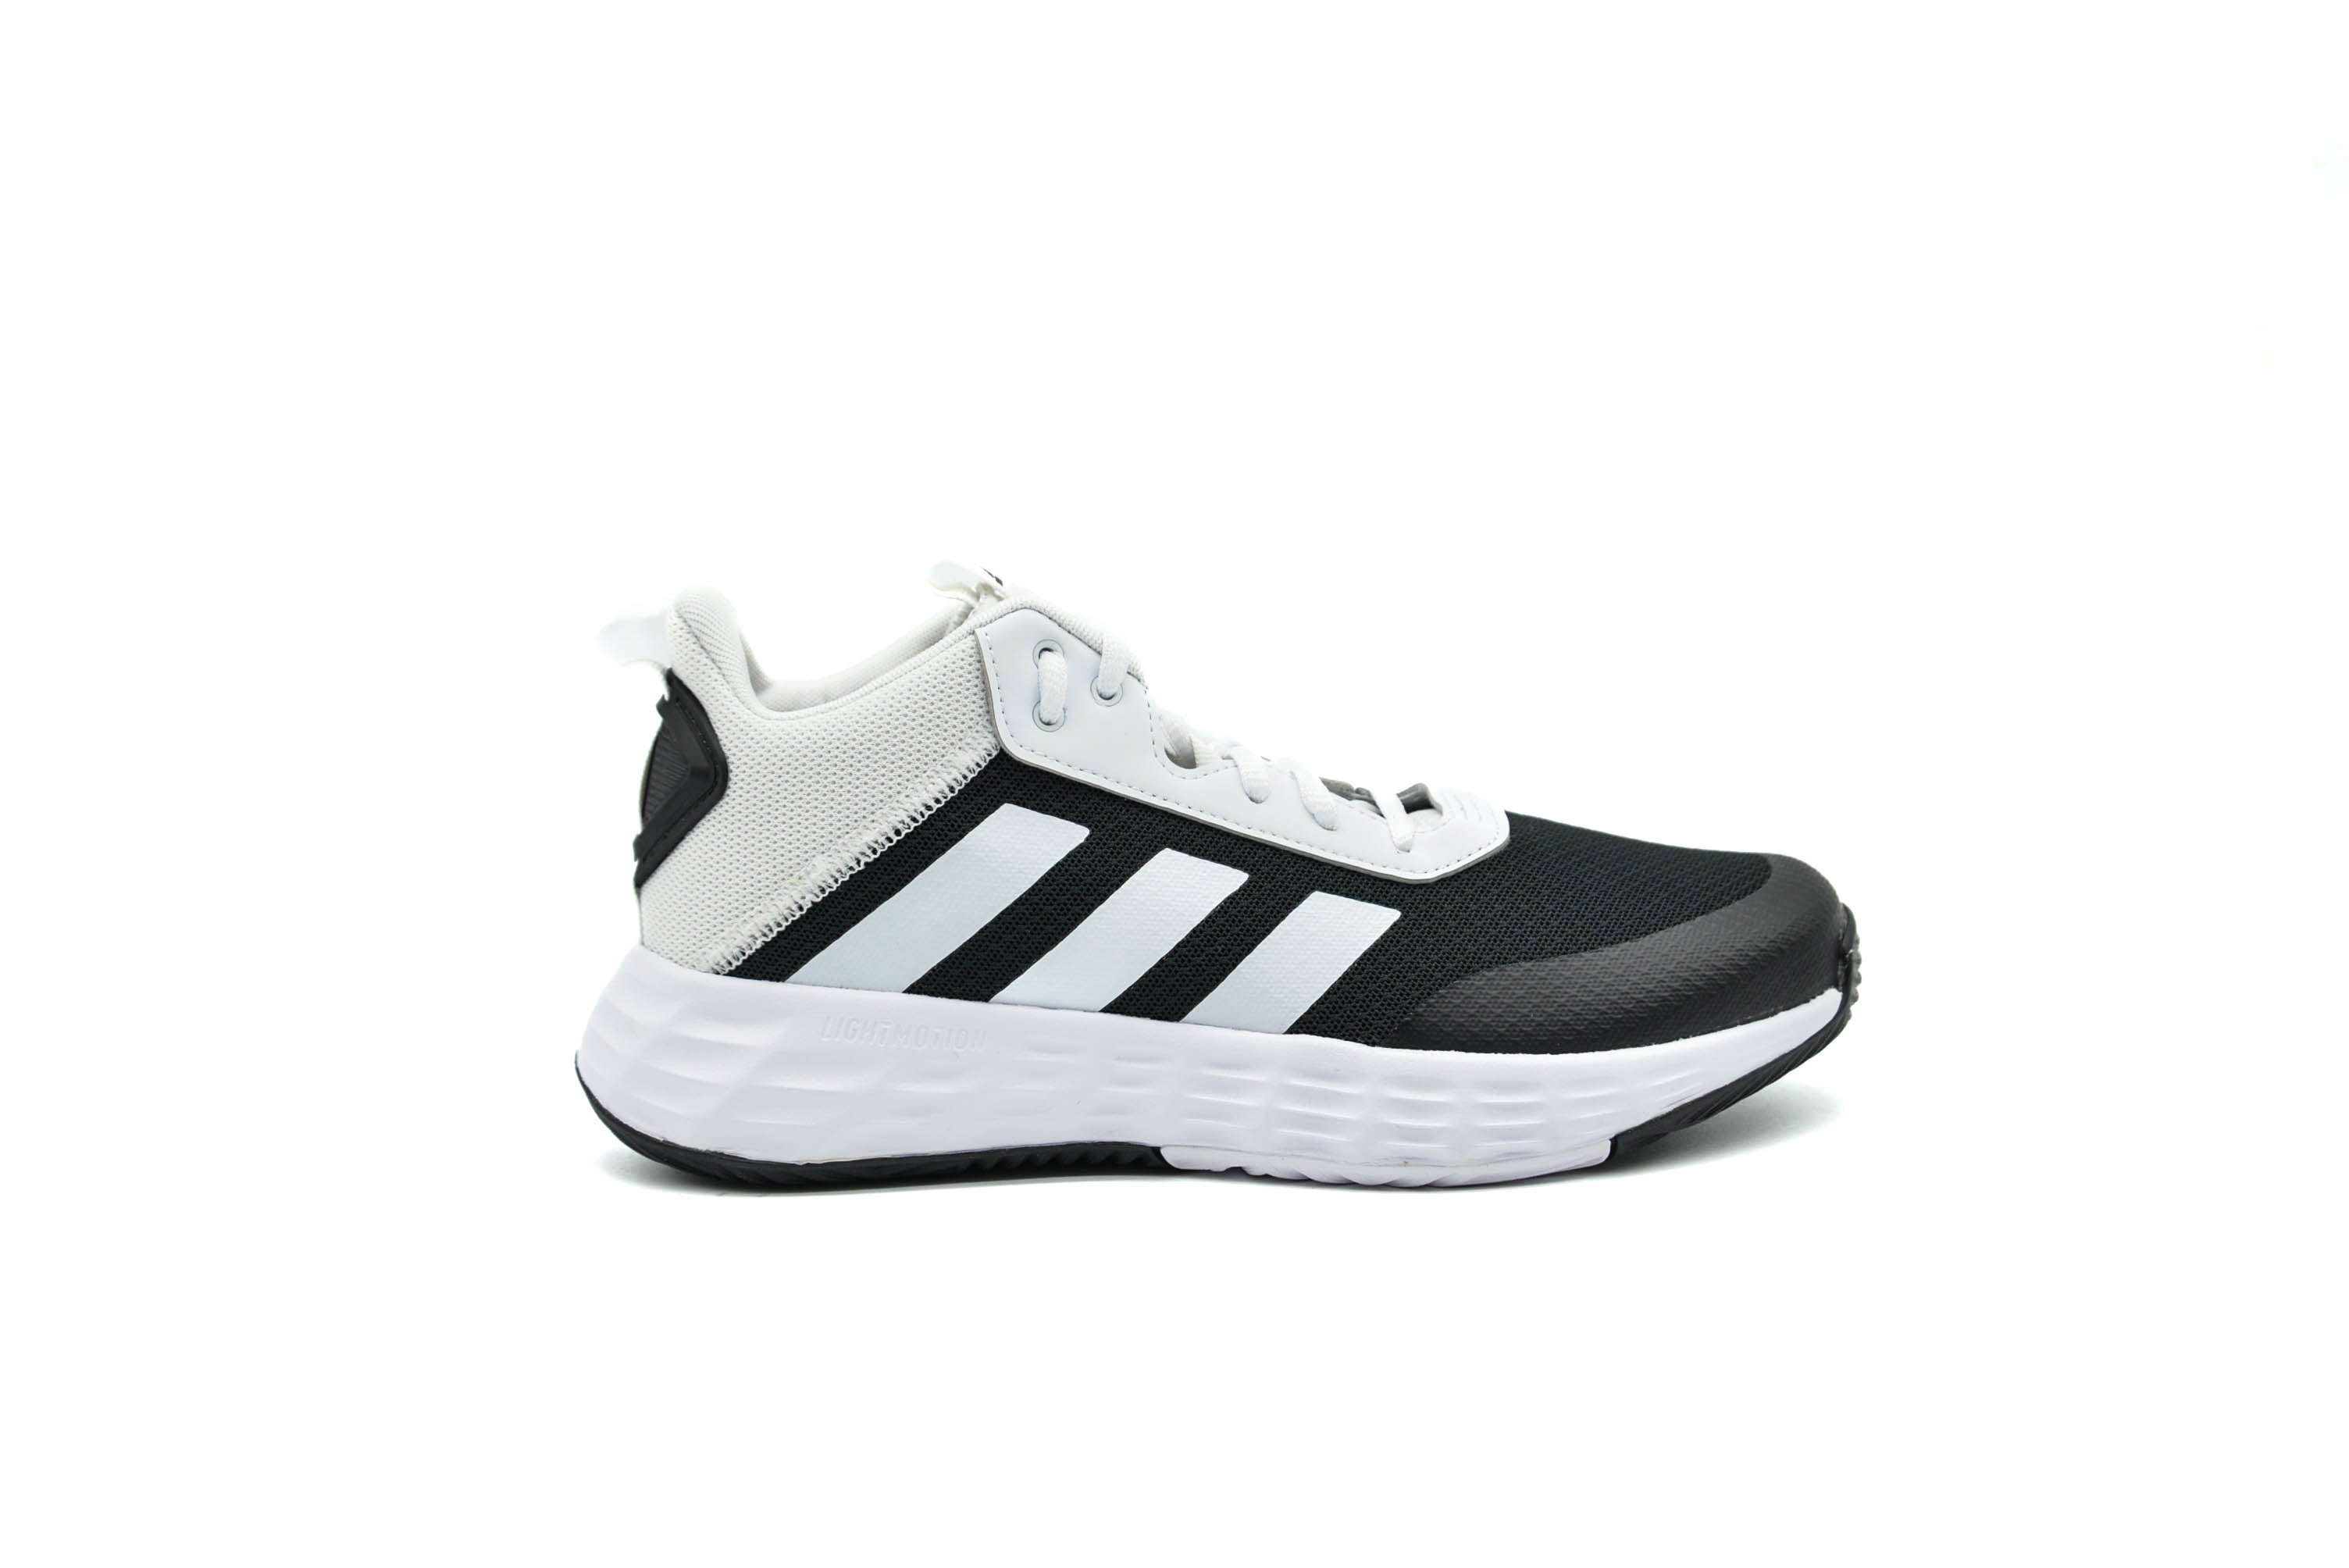 ADIDAS OWNTHEGAME 2.0 SHOES